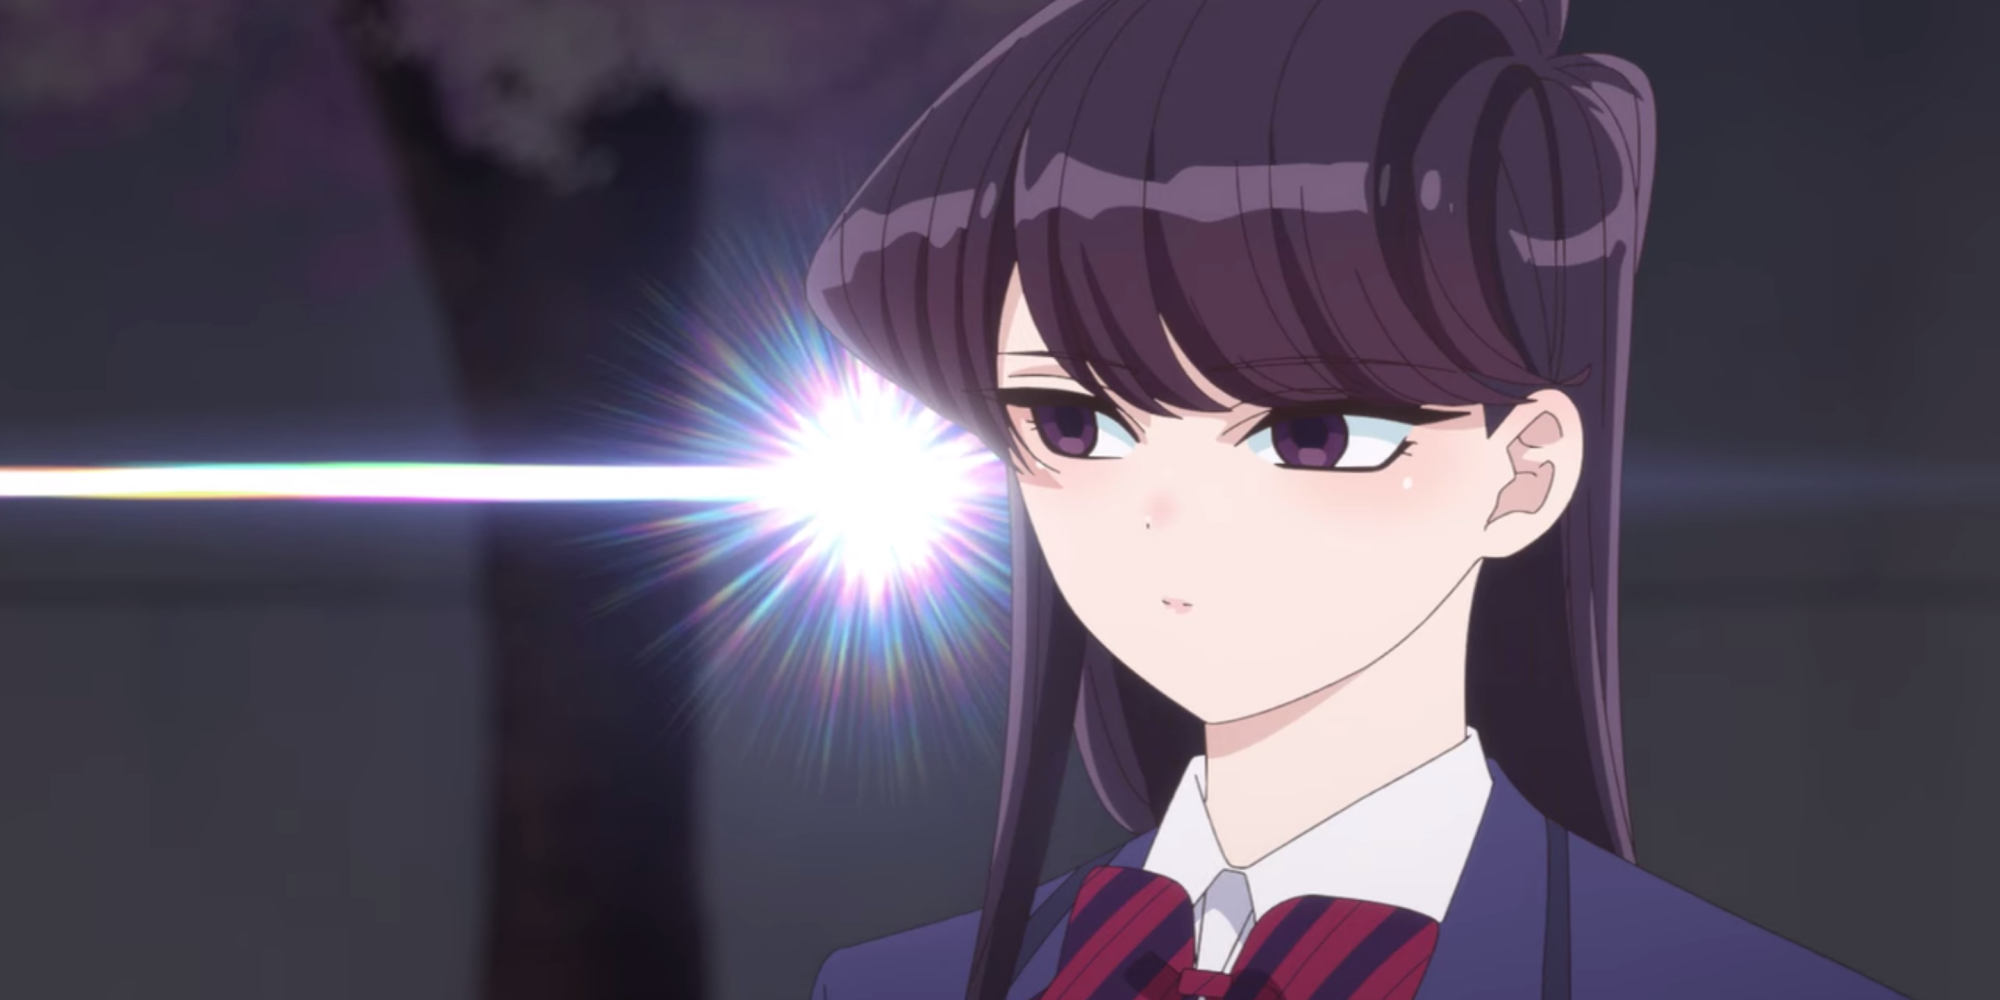 Komi looks on with a beam of light to signify intensity in Komi Can't Communicate